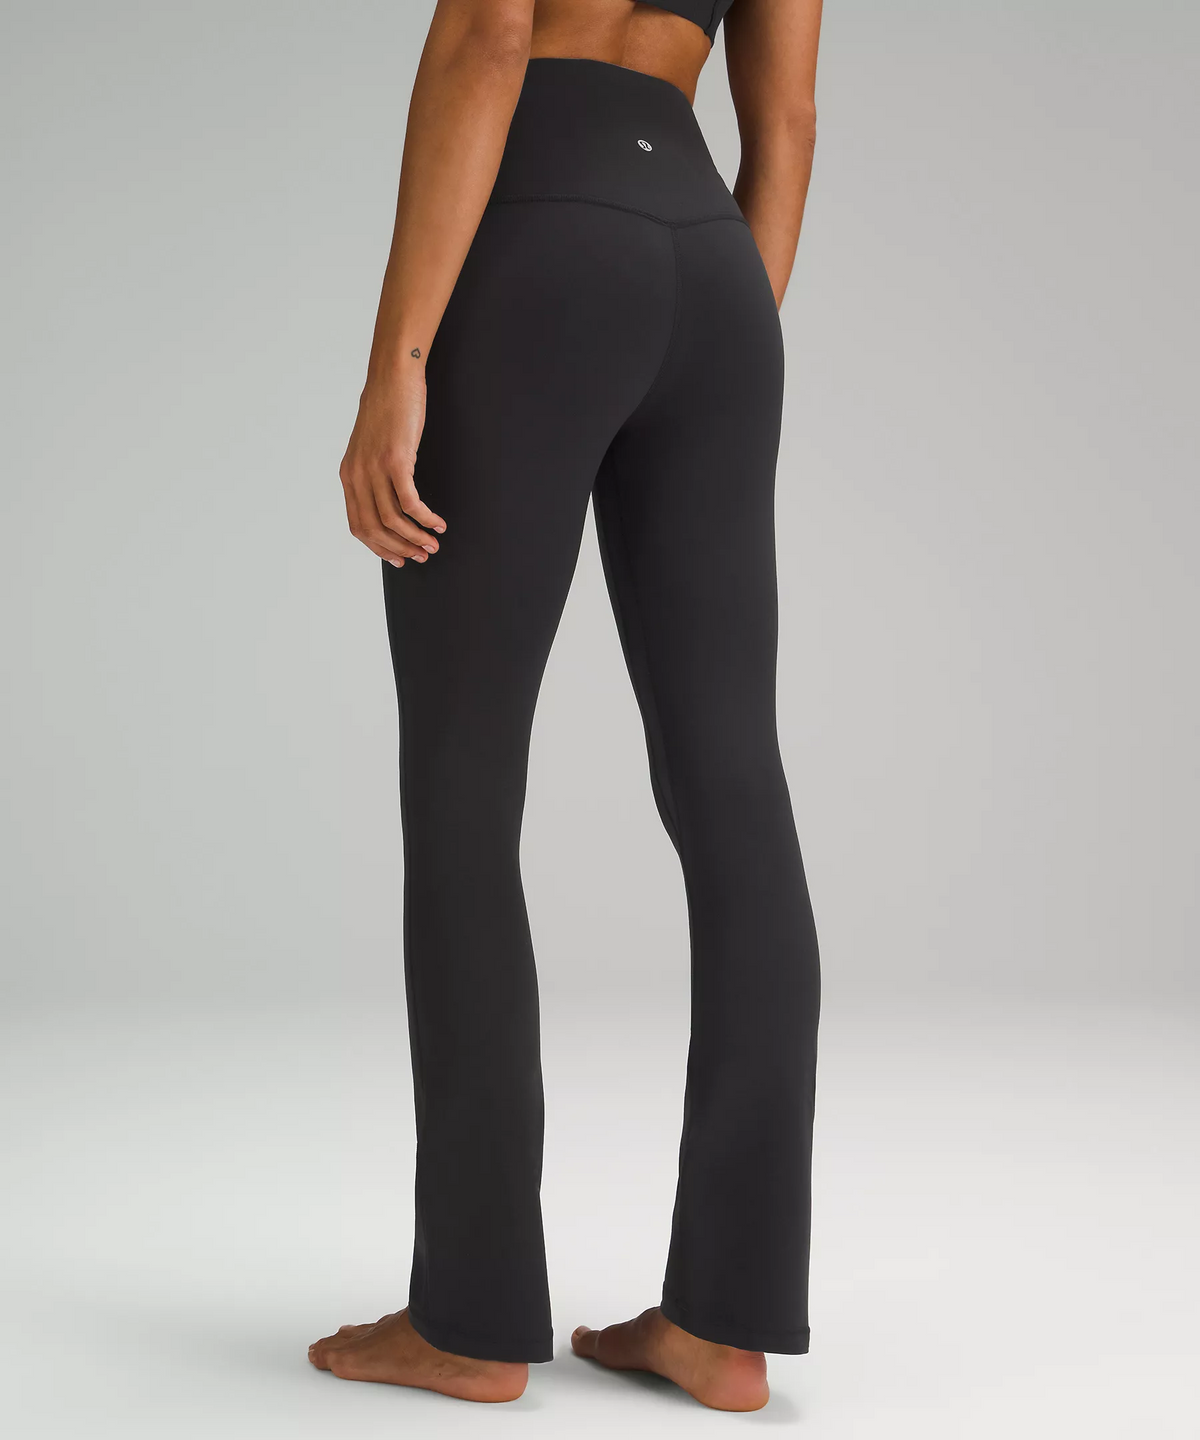 Buy Pu Mini Flare Pant Women's Bottoms from Fashion Lab. Find